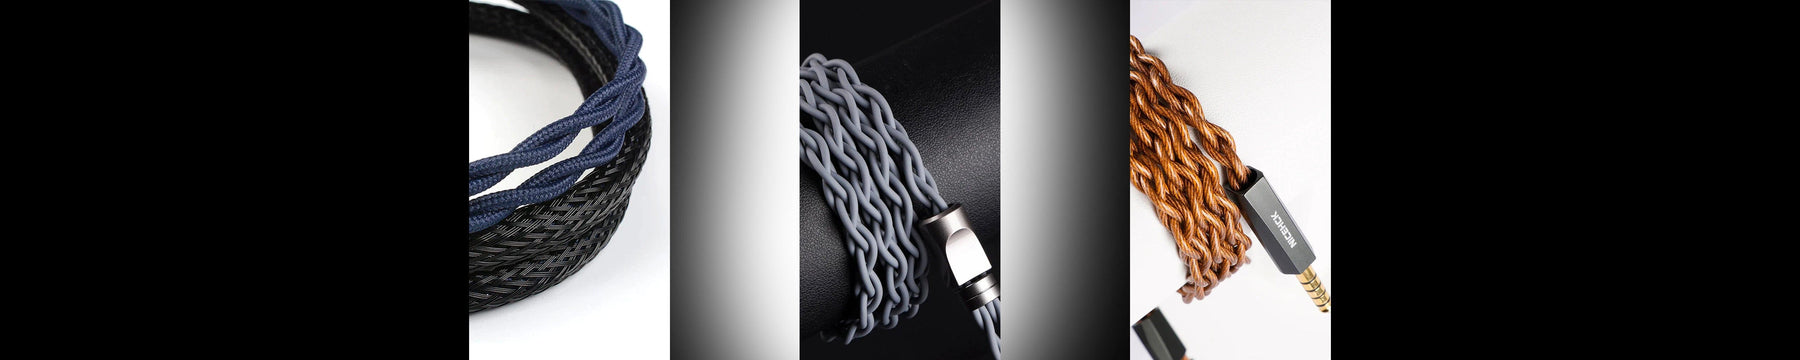 NICEHCK Launches Three New IEM Upgrade Cables: OurLaura, DualDragon, 1950Saga!!